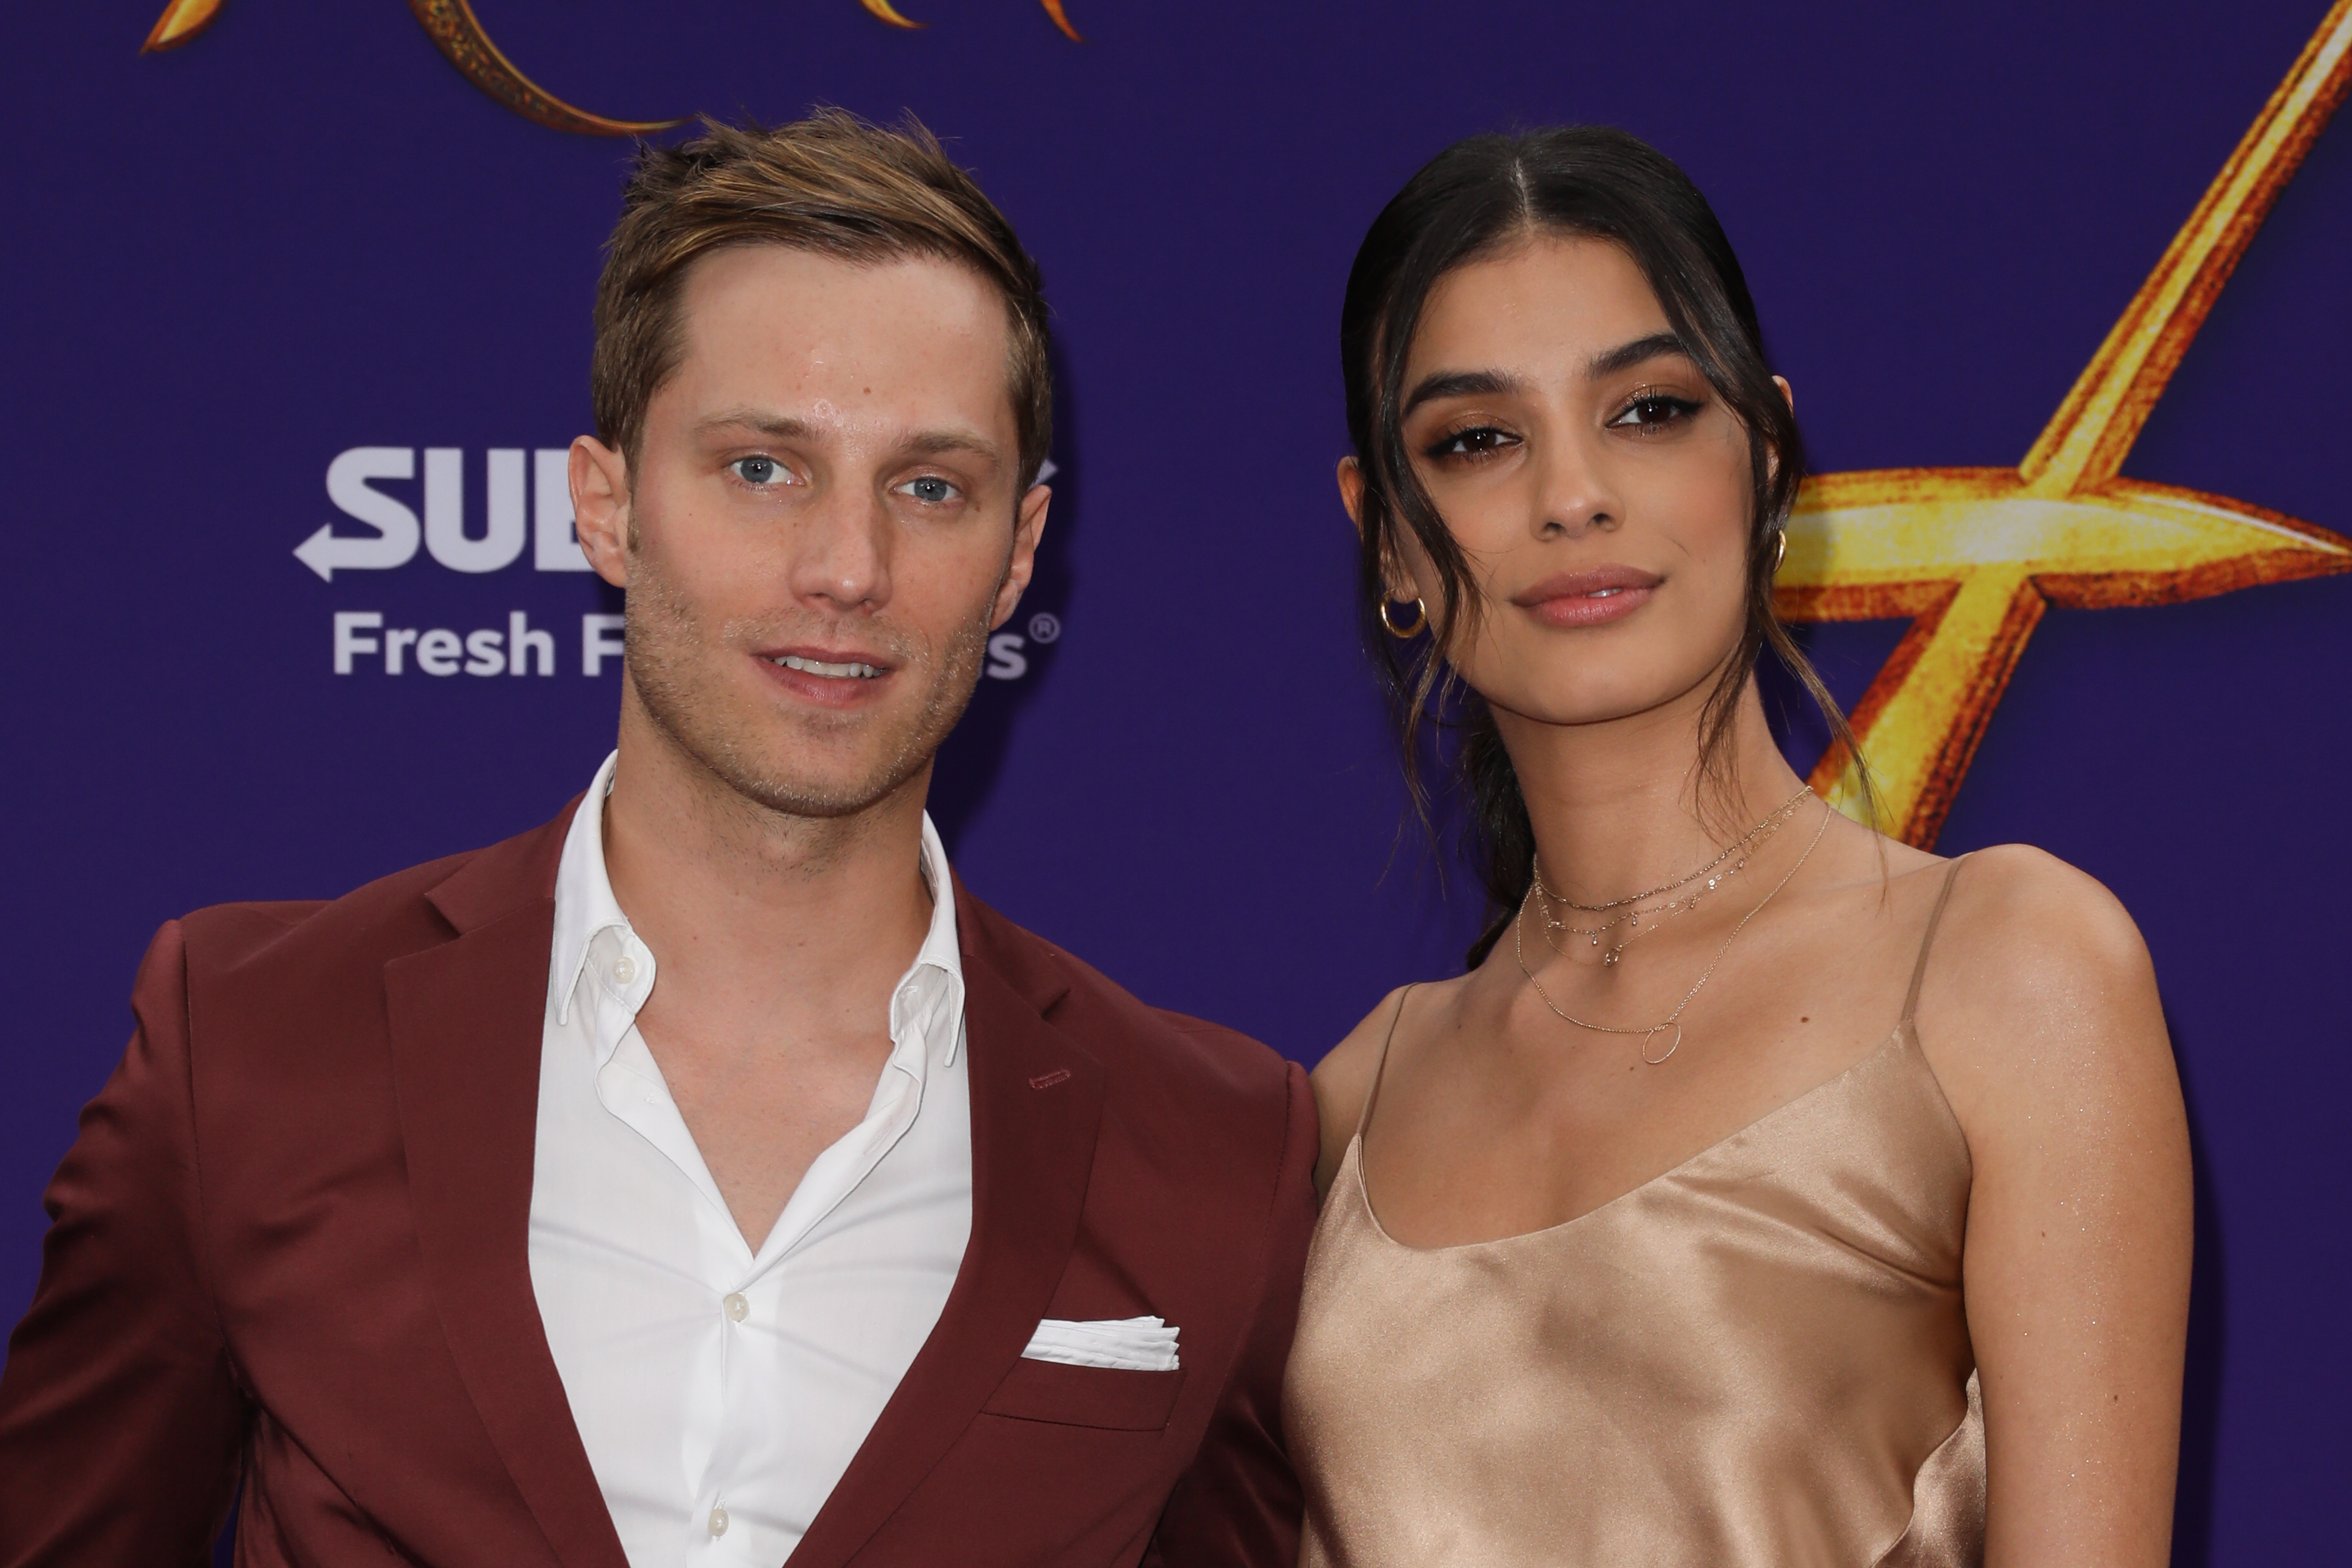 Jonathan Keltz and Laysla De Oliveira attend the premiere of Disney's "Aladdin" on May 21, 2019, in Los Angeles, California. | Source: Getty Images